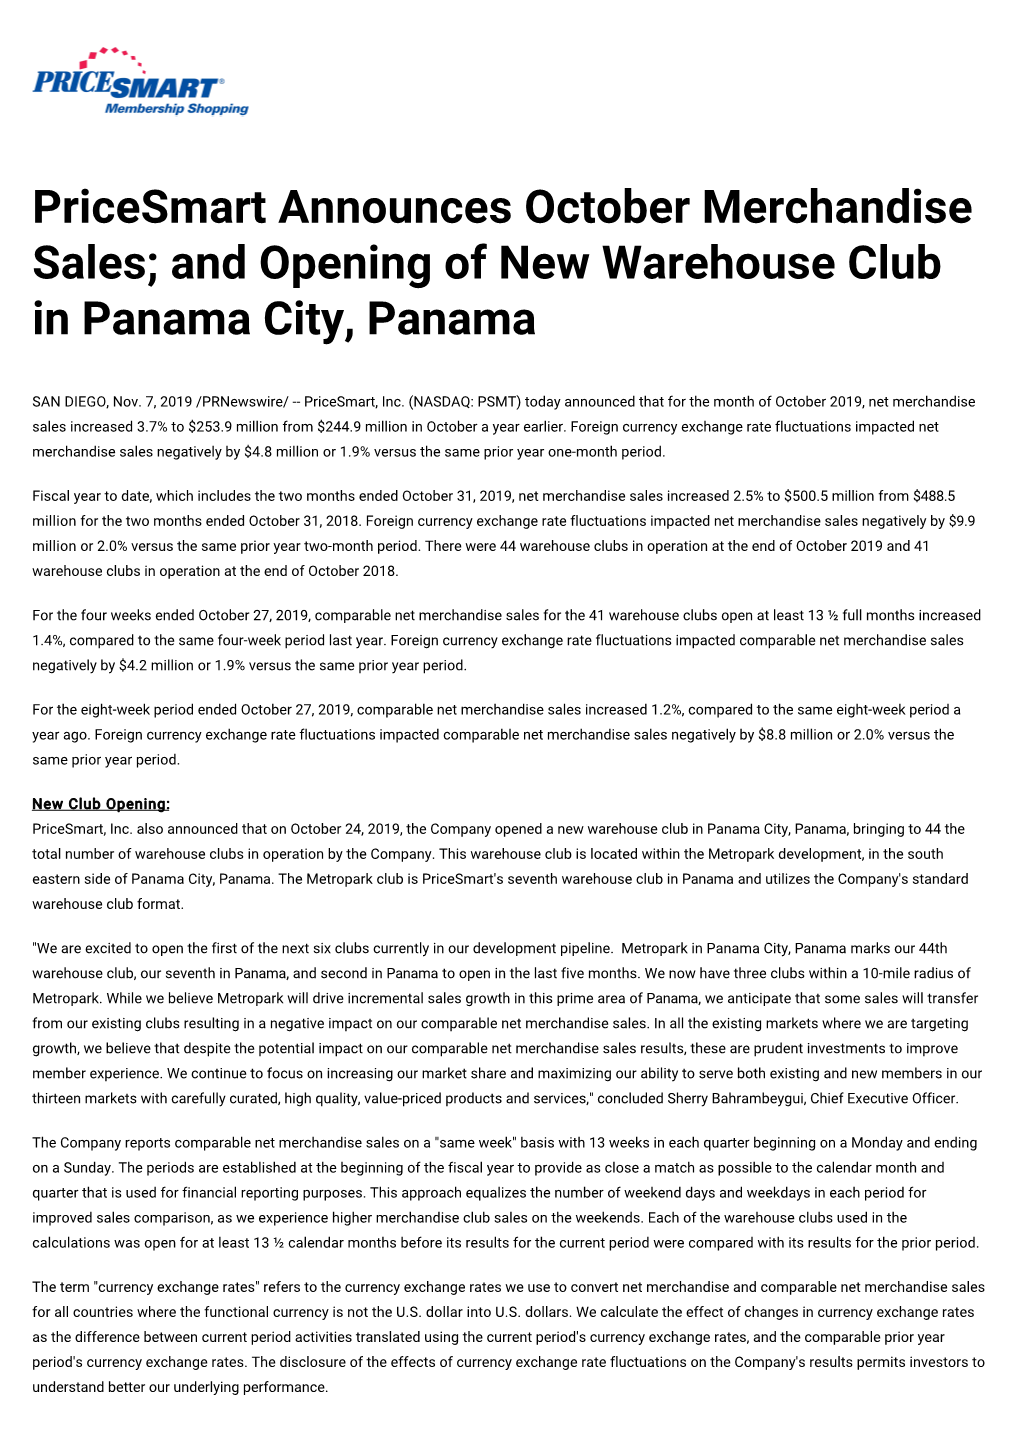 And Opening of New Warehouse Club in Panama City, Panama